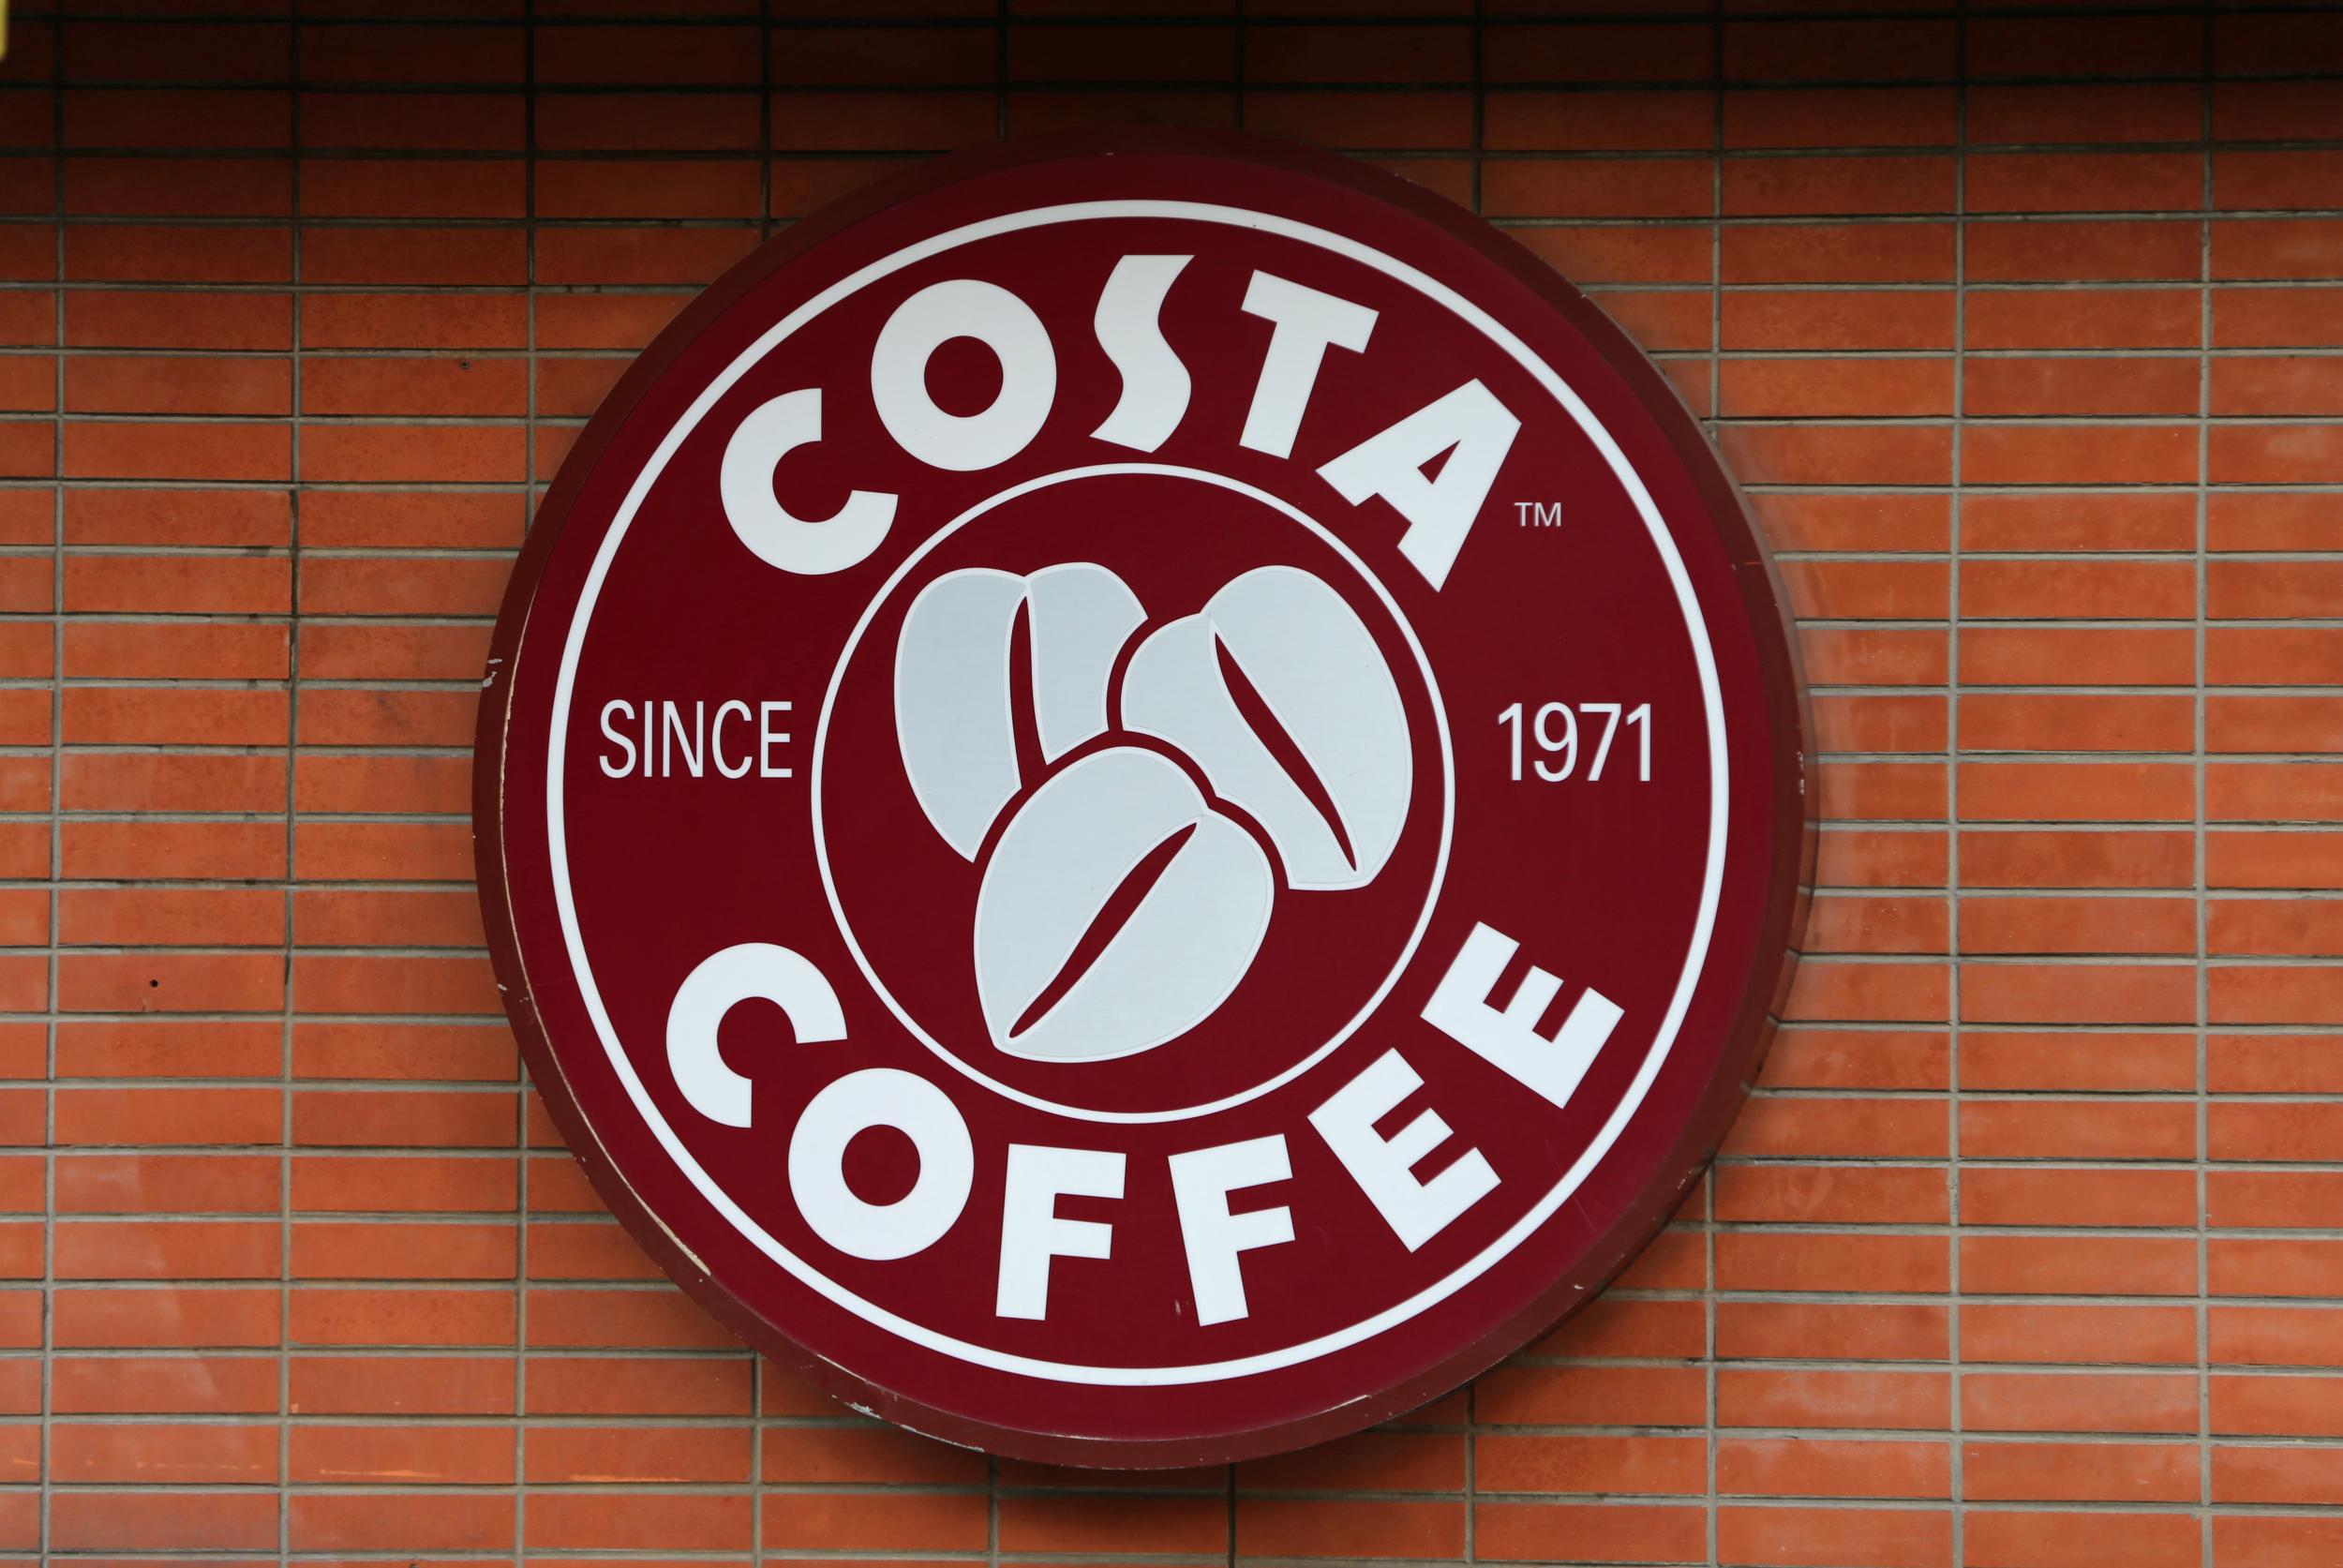 There are 2,300 Costa stores in the UK